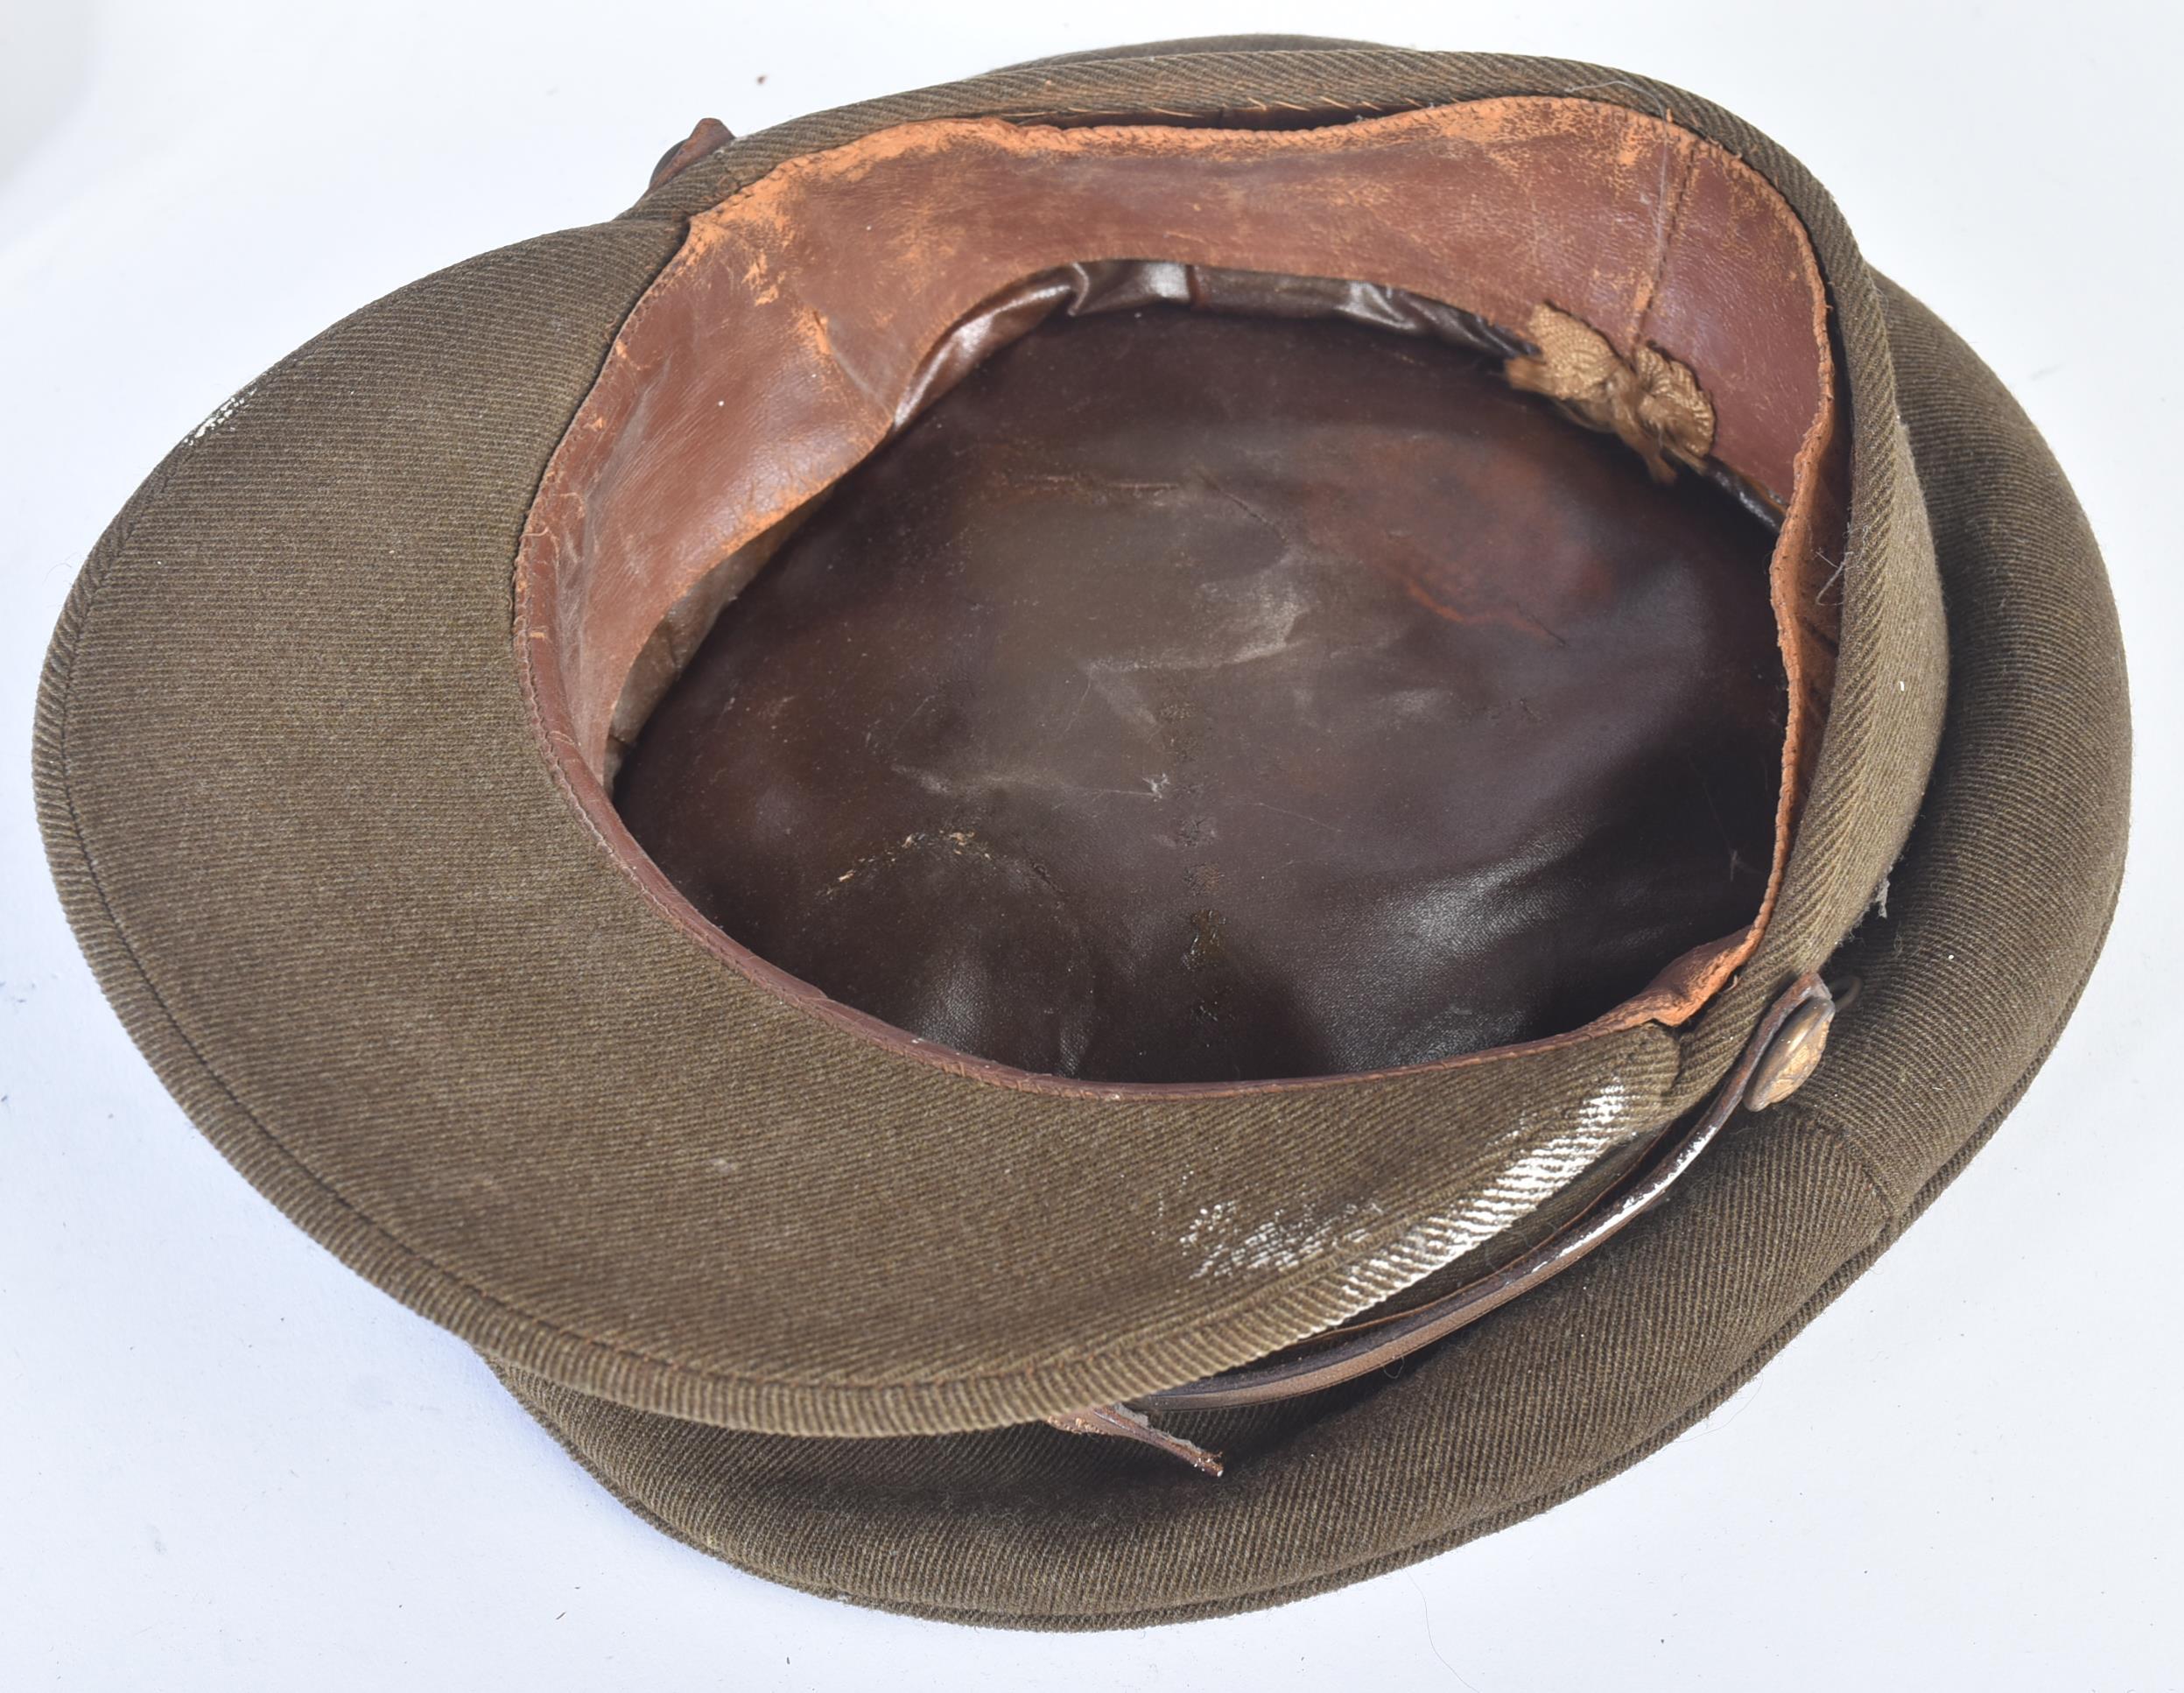 FRENCH OFFICER'S UNIFORM WORN BY LTC MIKSCHE WITH CAP - Image 4 of 9